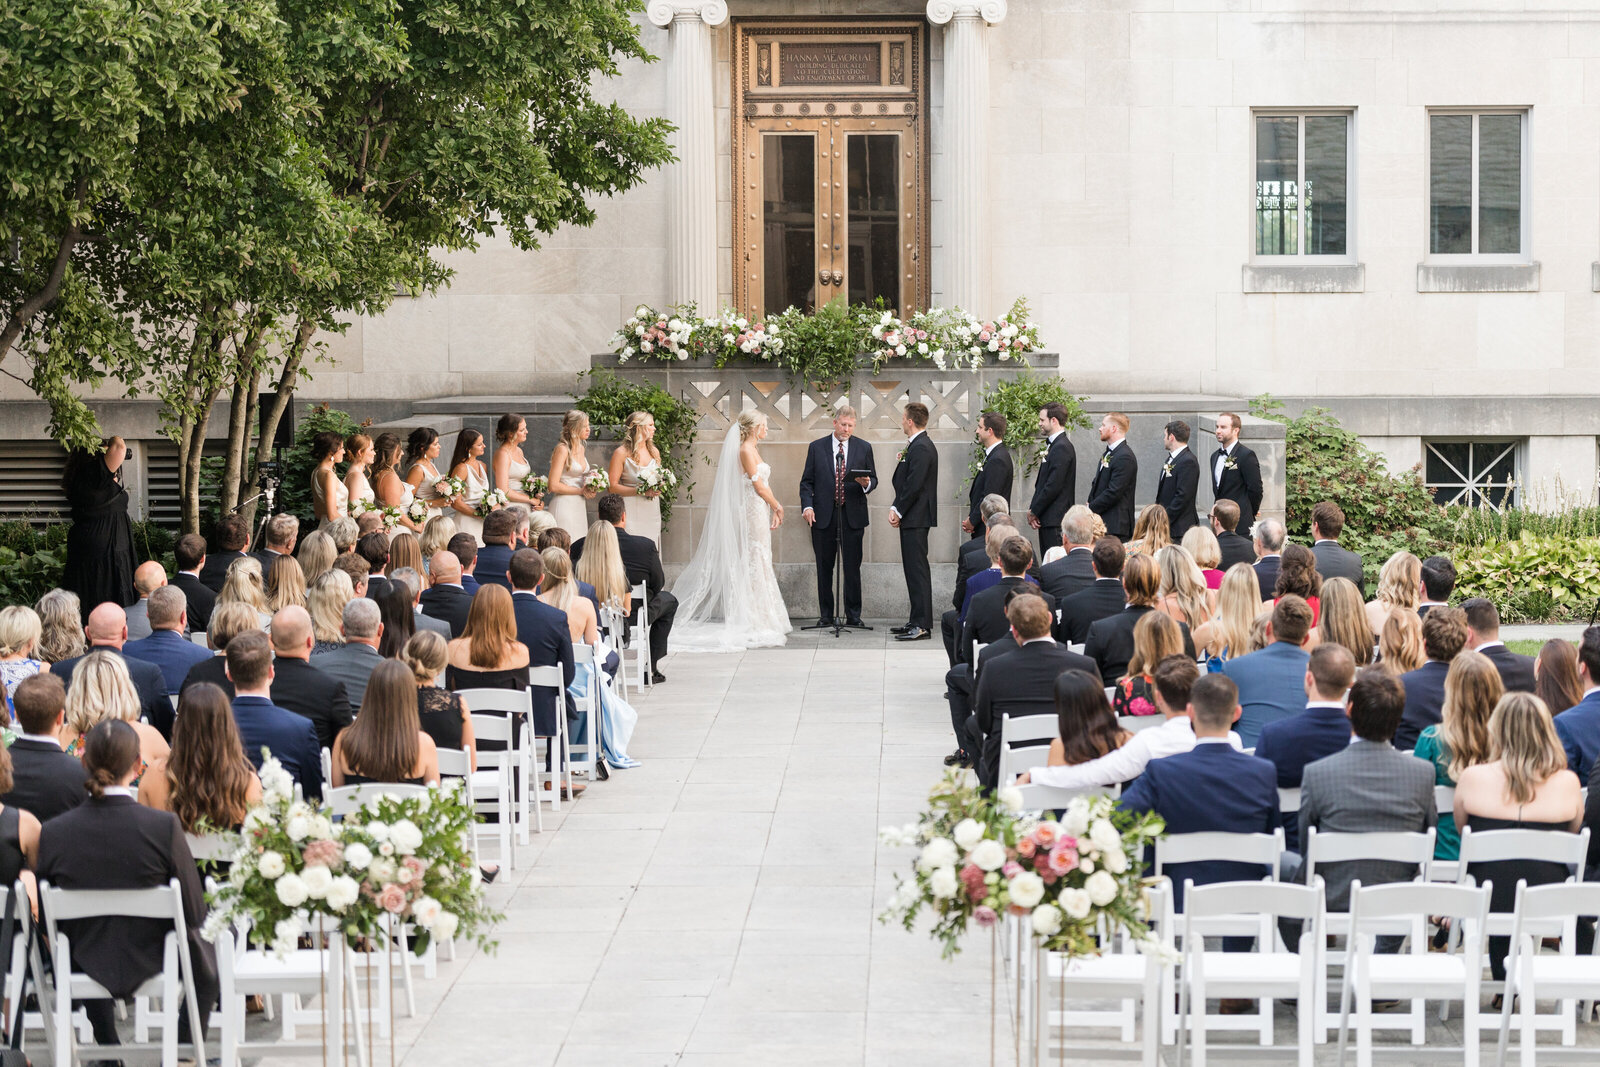 Ceremony in the courtyard